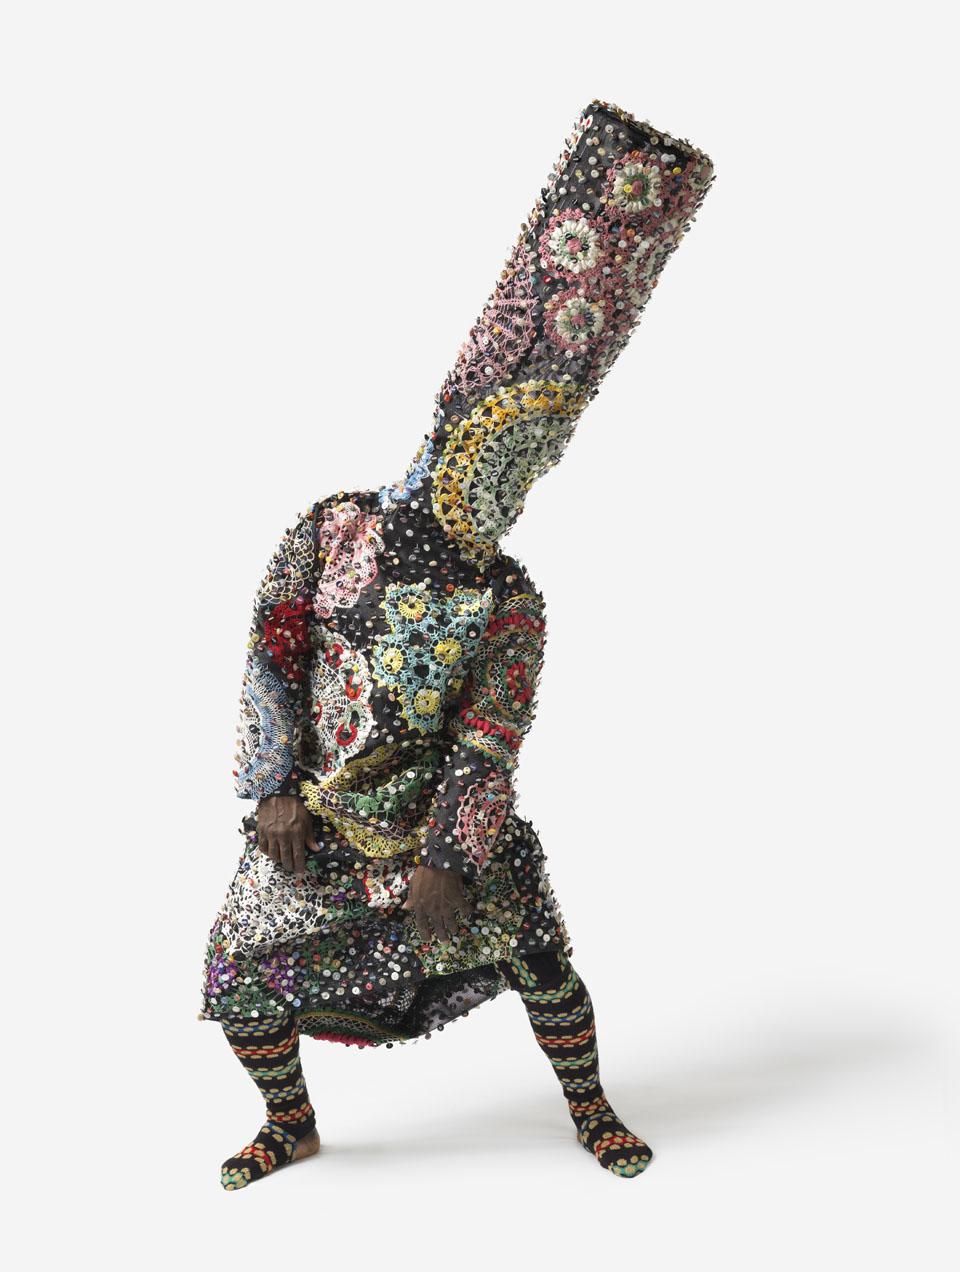 Nick Cave, <i>Soundsuit,</i> 2009.
Mixed media, 96 x 27 x 14 inches. Image courtesy of the Birmingham Museum of Art.
